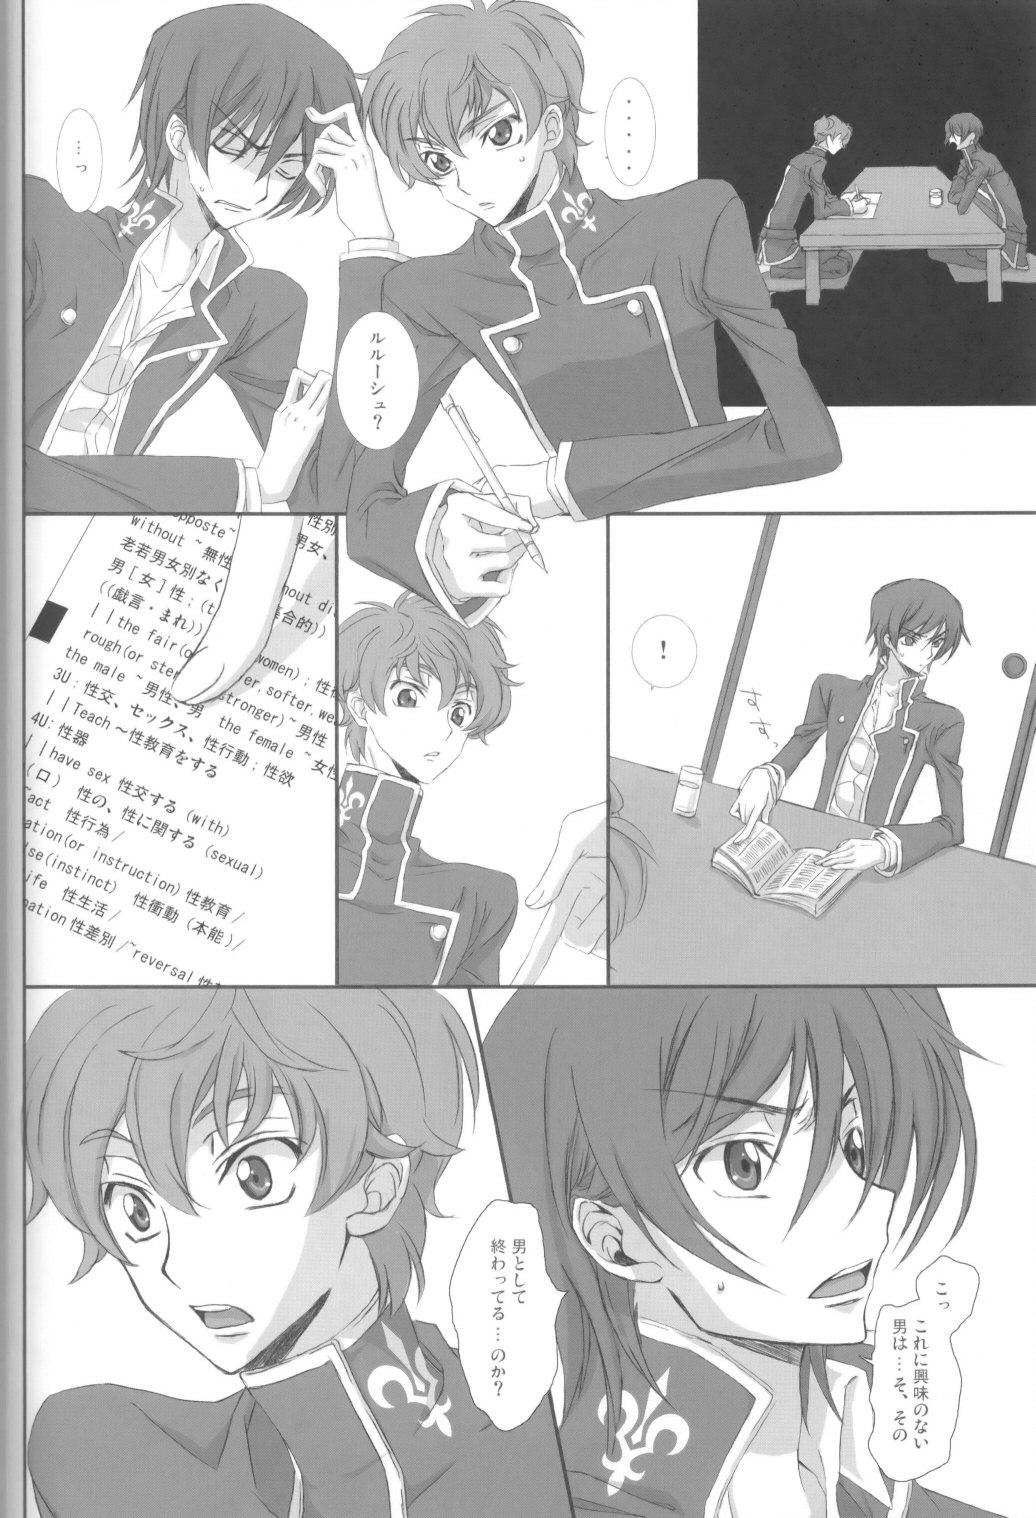 Stripping on・non・om - Code geass Casa - Page 7